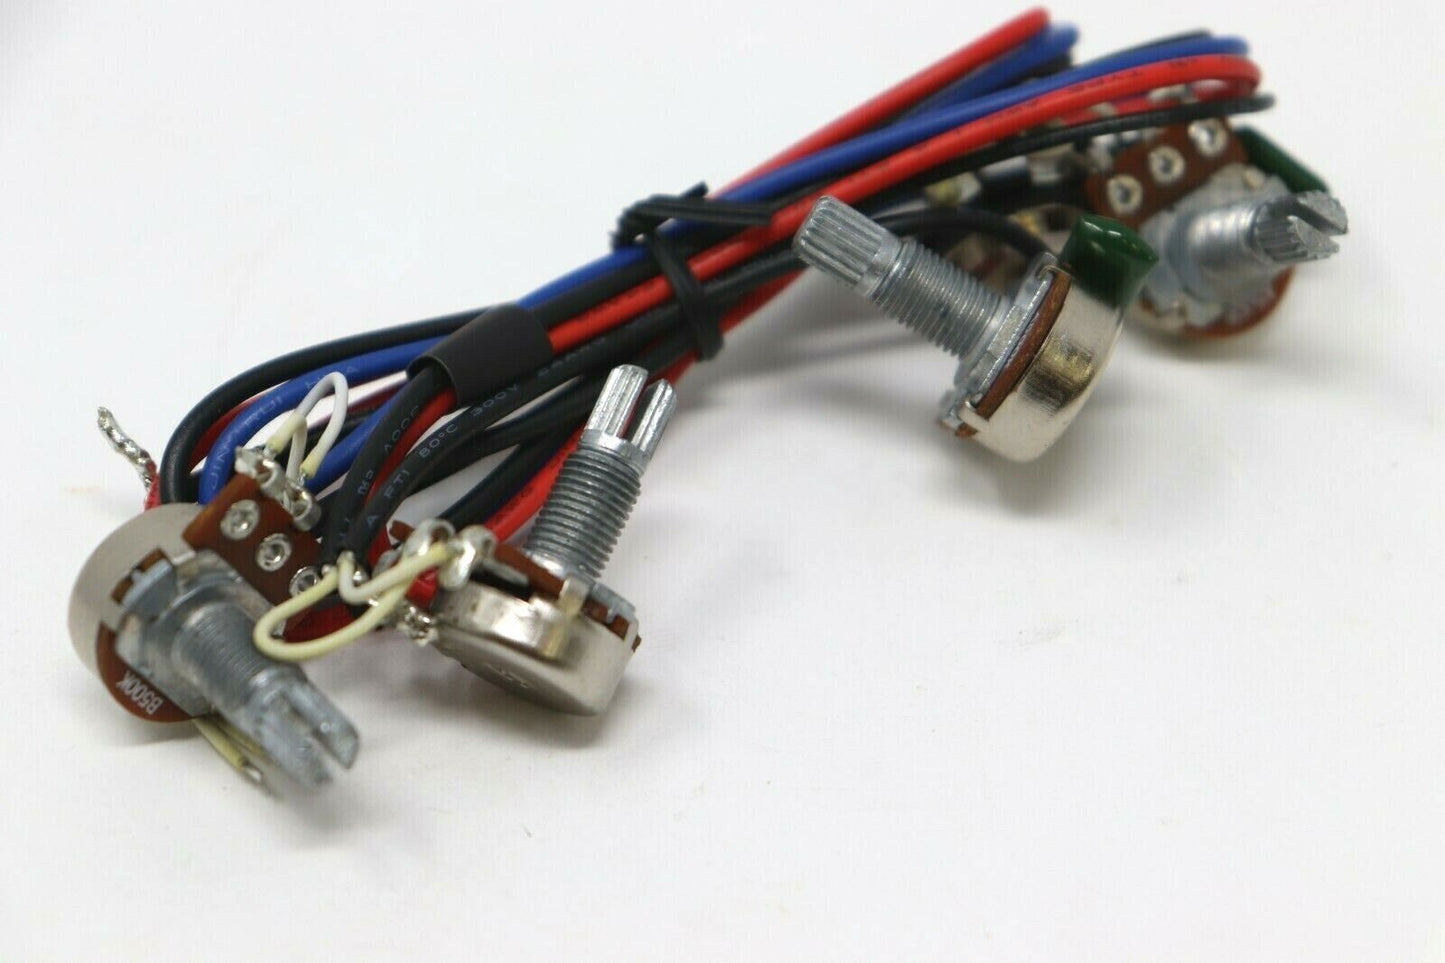 Wiring Harness for LP/SG/335 Style Guitars